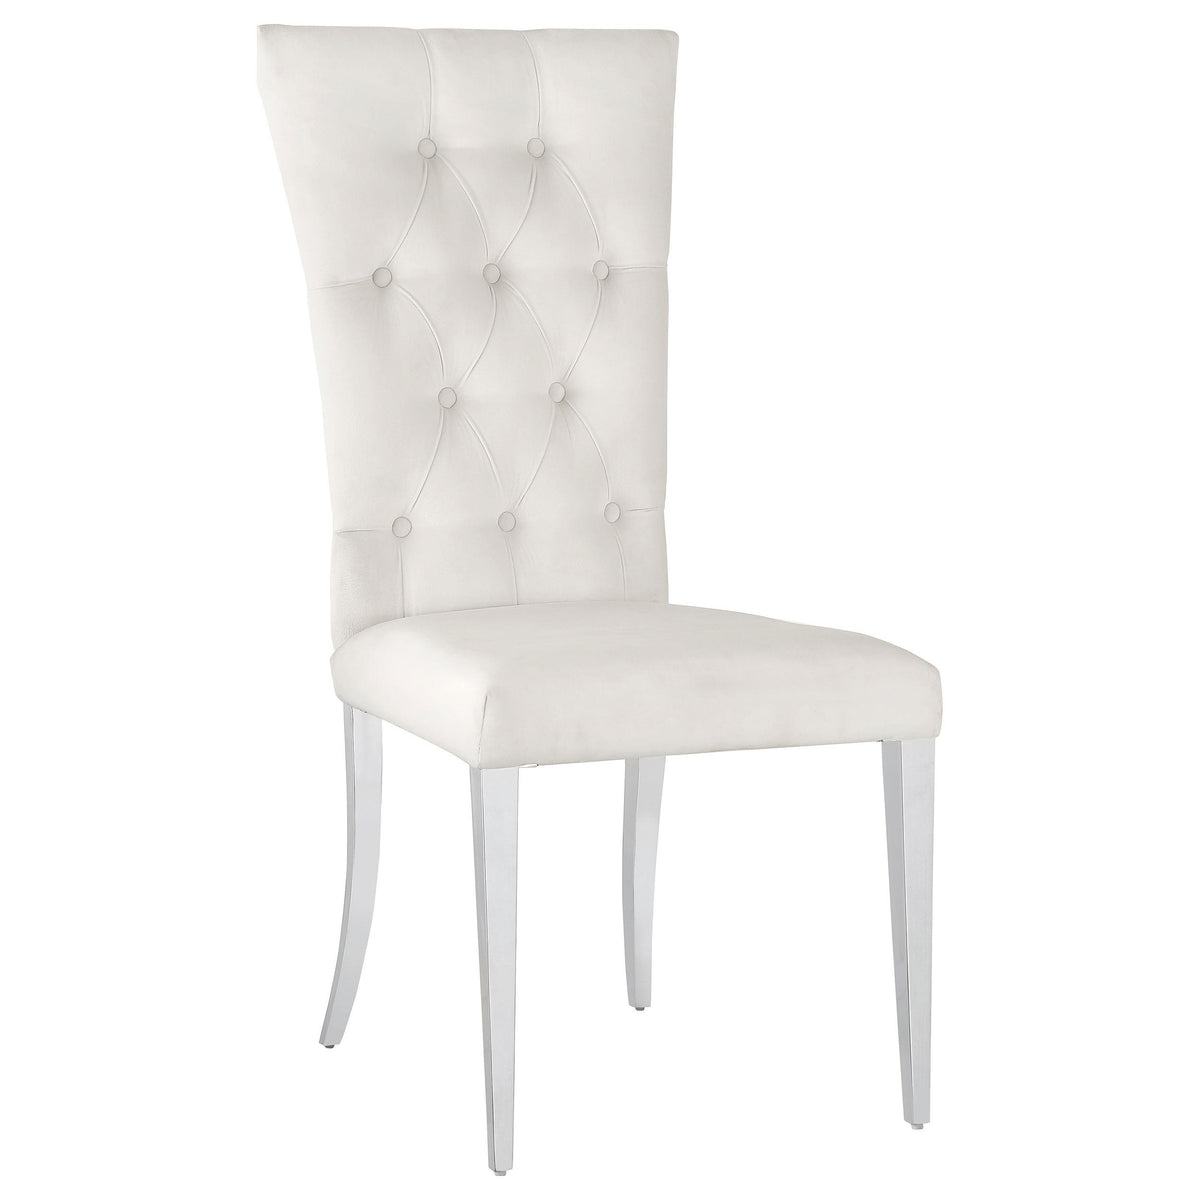 Kerwin Tufted Upholstered Side Chair (Set Of 2)  Half Price Furniture